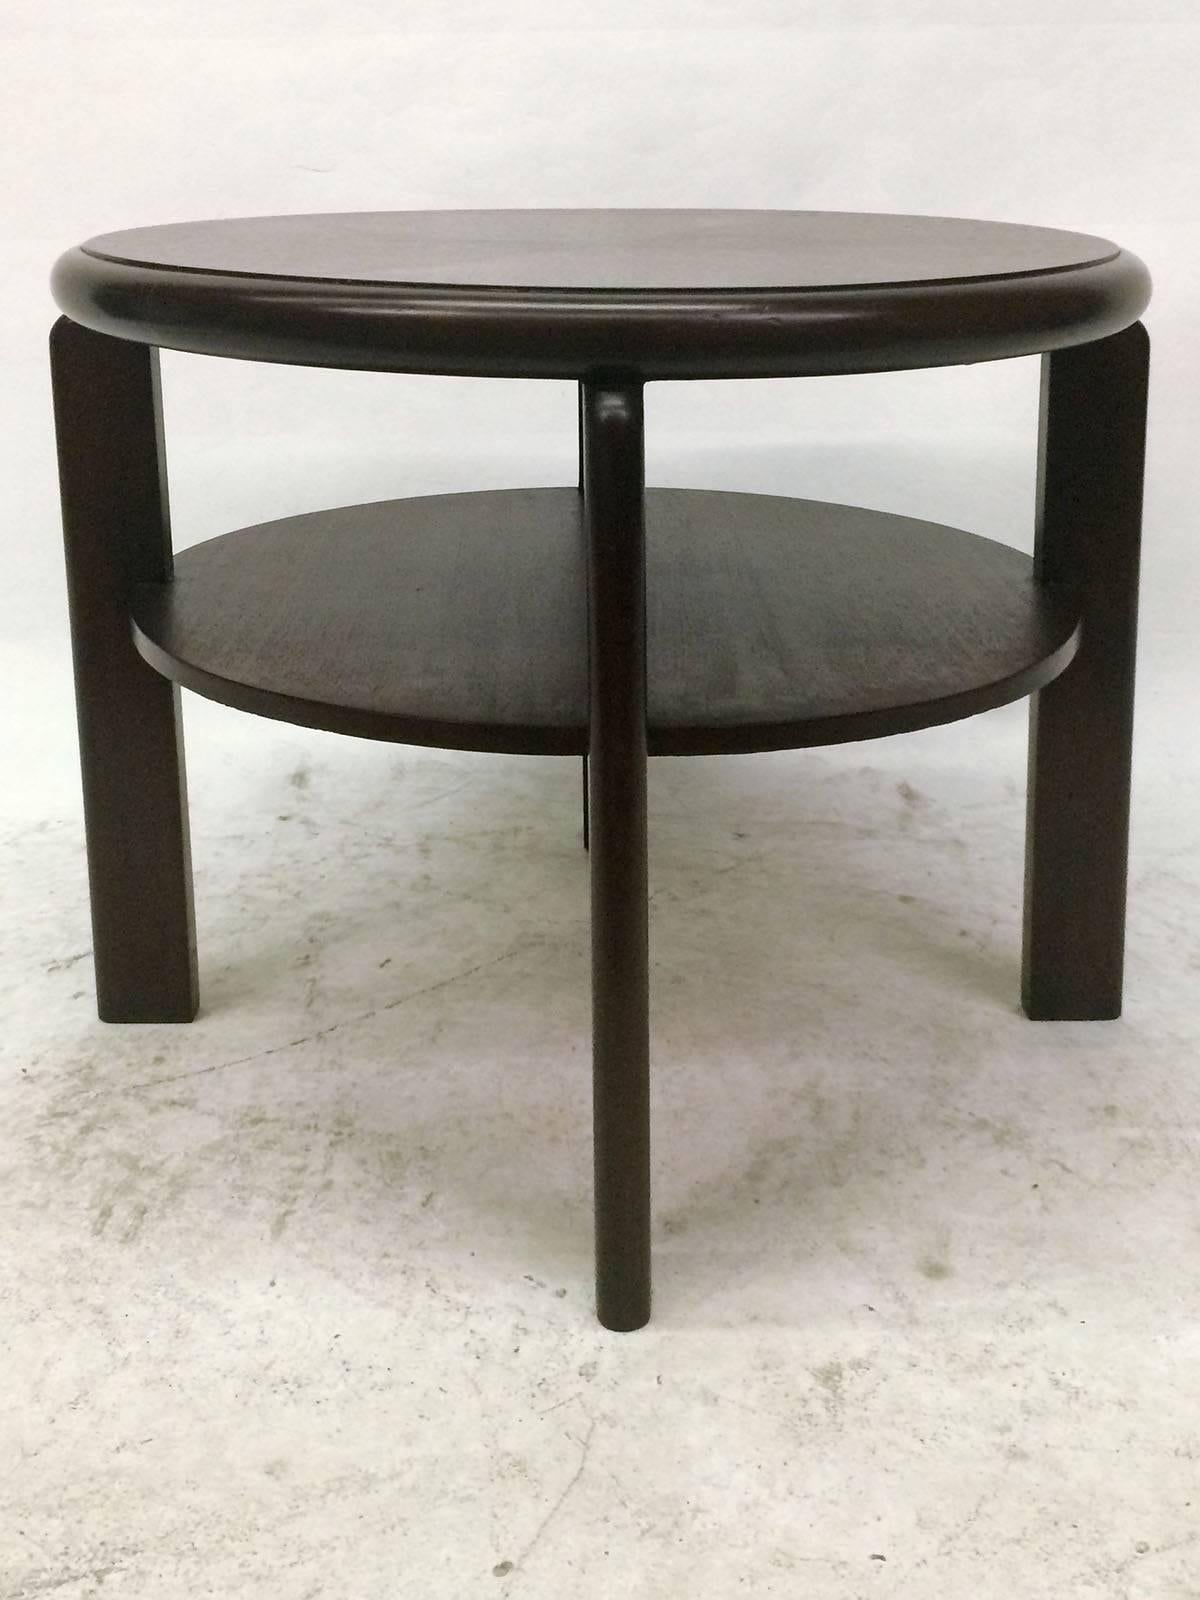 Round four-legged Art Deco table in dark stained mahogany, soft edges. The table's top is constructed using a symmetrical starburst wood inlay pattern and also has a lower round shelf.